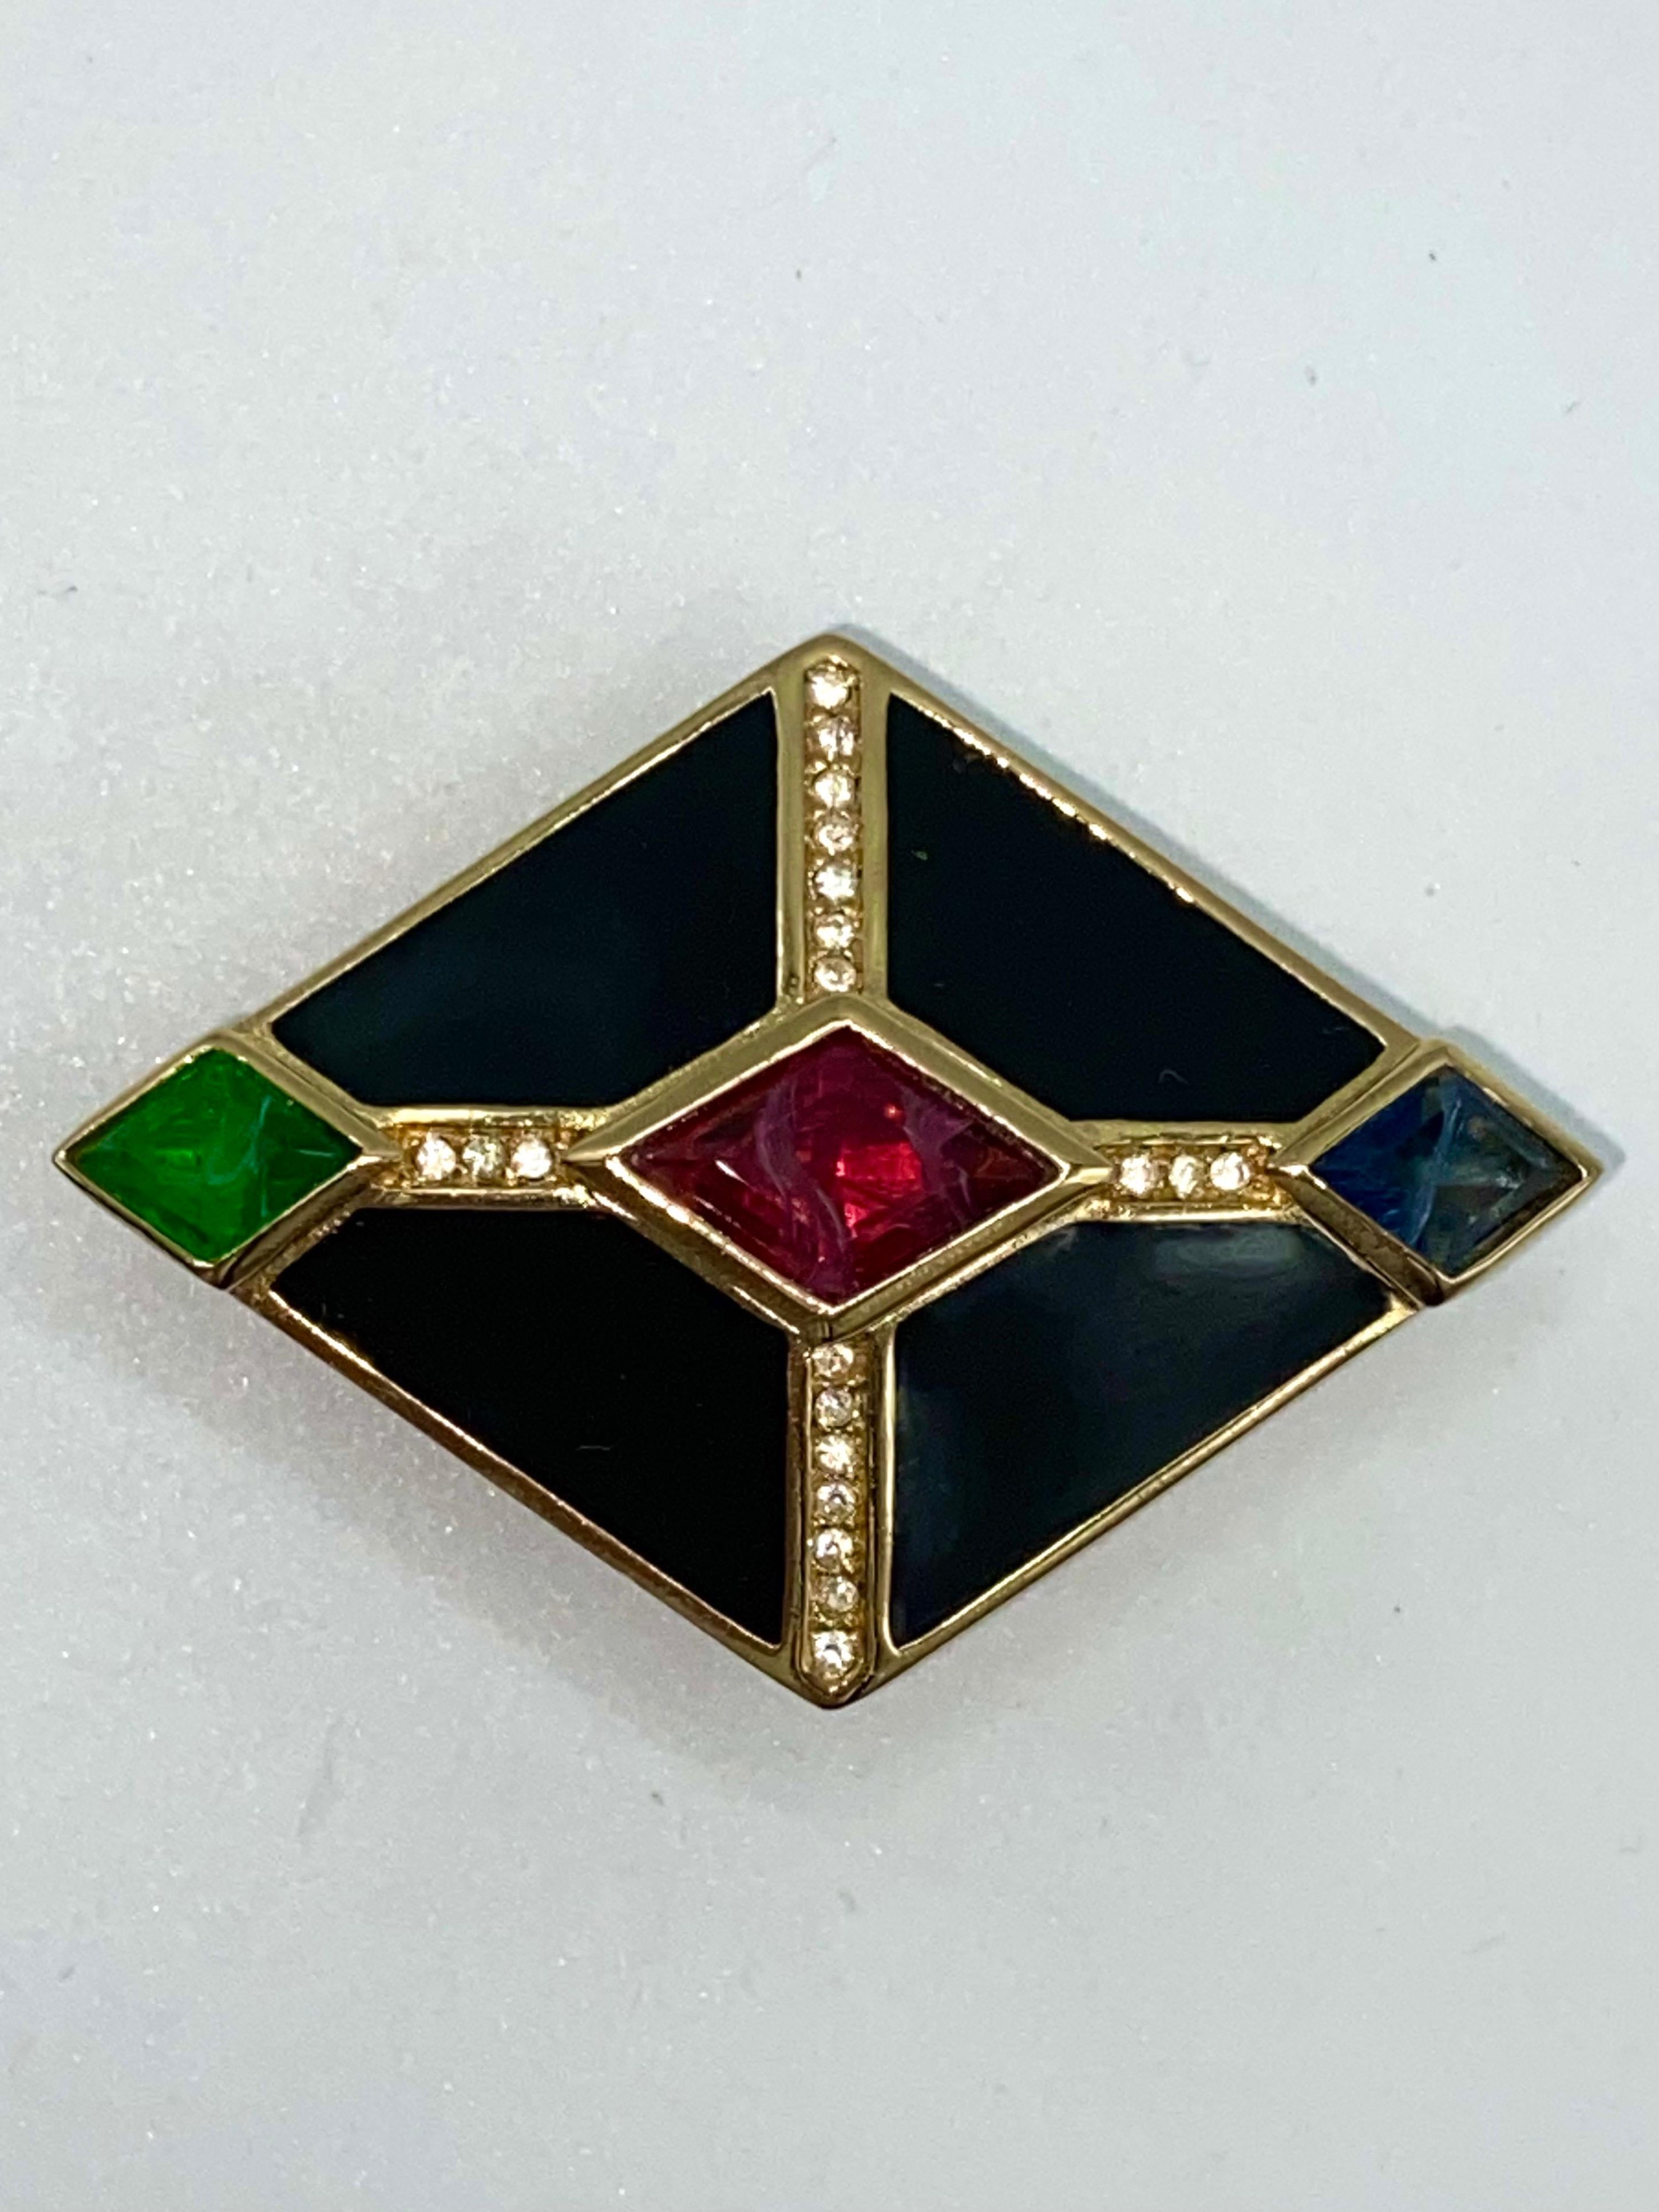 An elegant 1980s Art Deco style brooch by Christian Dior. The diamond shape brooch has black enamel on gold and is set with three diamond shape glass stones. The faux emerald, ruby and sapphire stones show steaks of white in them in same manner as